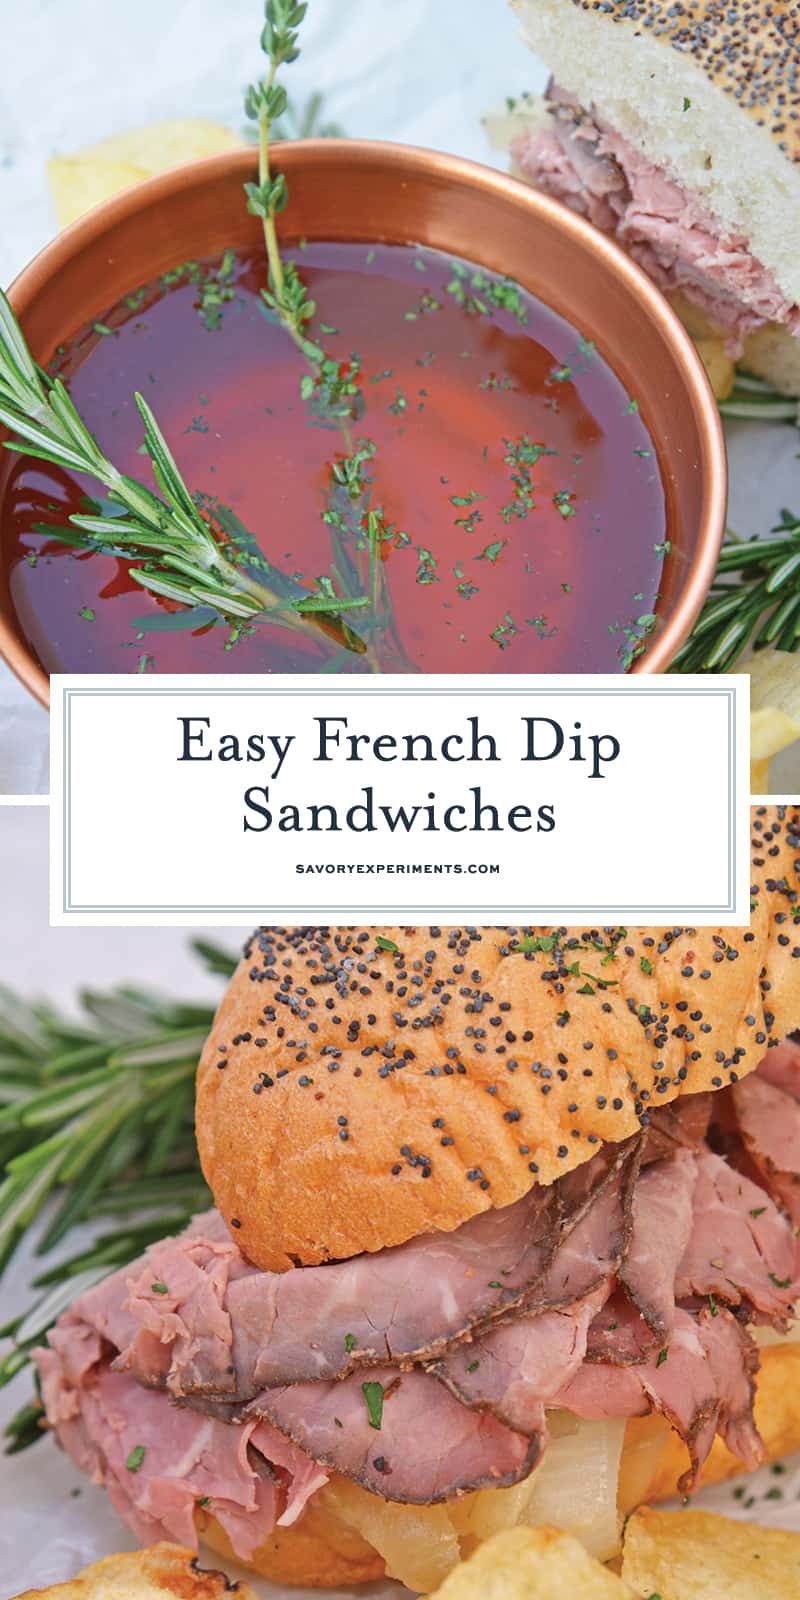 Easy French Dip Sandwiches are made from tender roast beef with caramelized onions, roasted garlic, whipped horseradish cream sauce on brioche rolls! #roastbeefsandwich #frenchdipsandwiches www.savoryexperiments.com